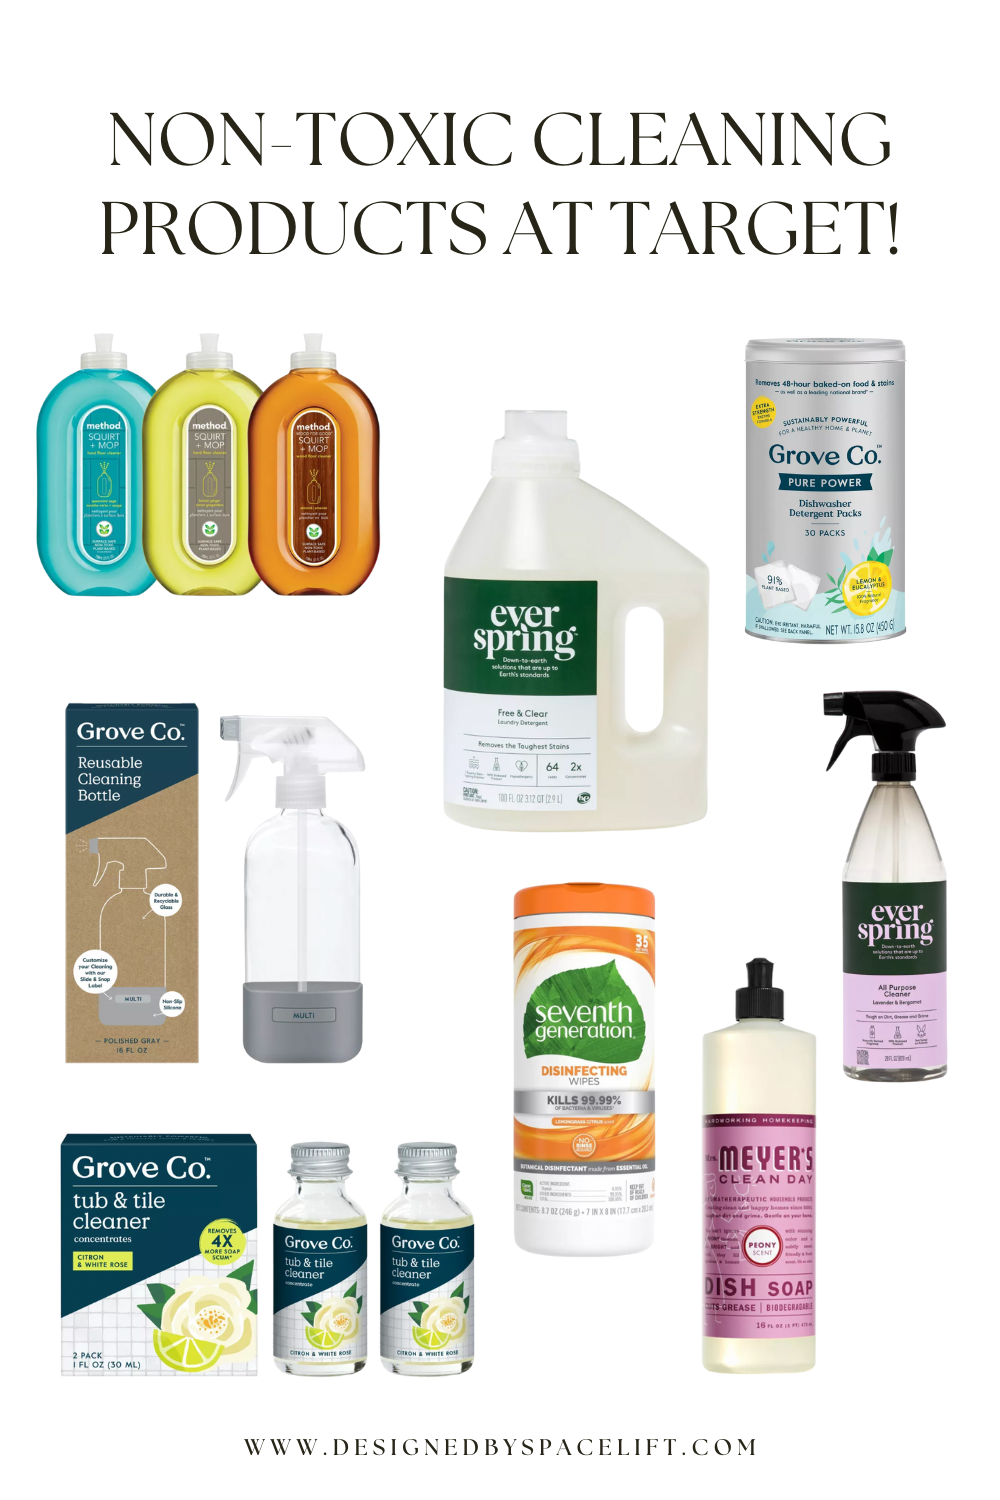 Non-Toxic Cleaning Products at Target! — SpaceLift